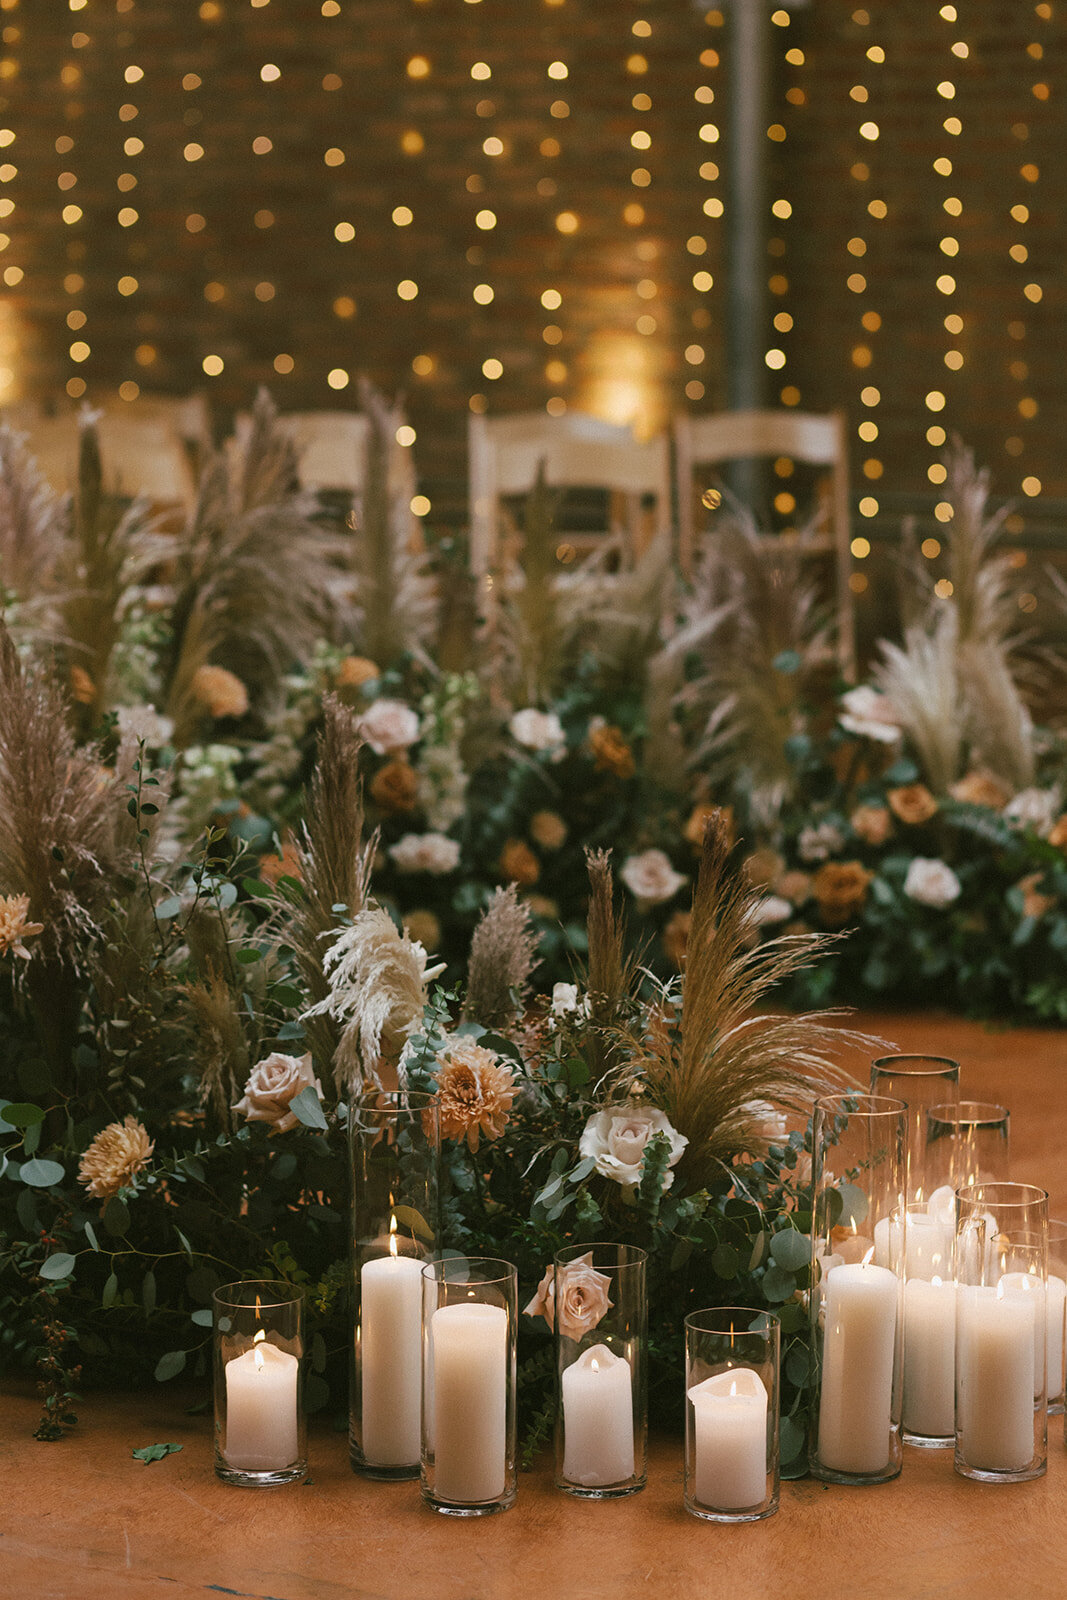 Pampas grass, eucalyptus and roses in abundant display at wedding ceremony at Loft on Lake, Chicago.